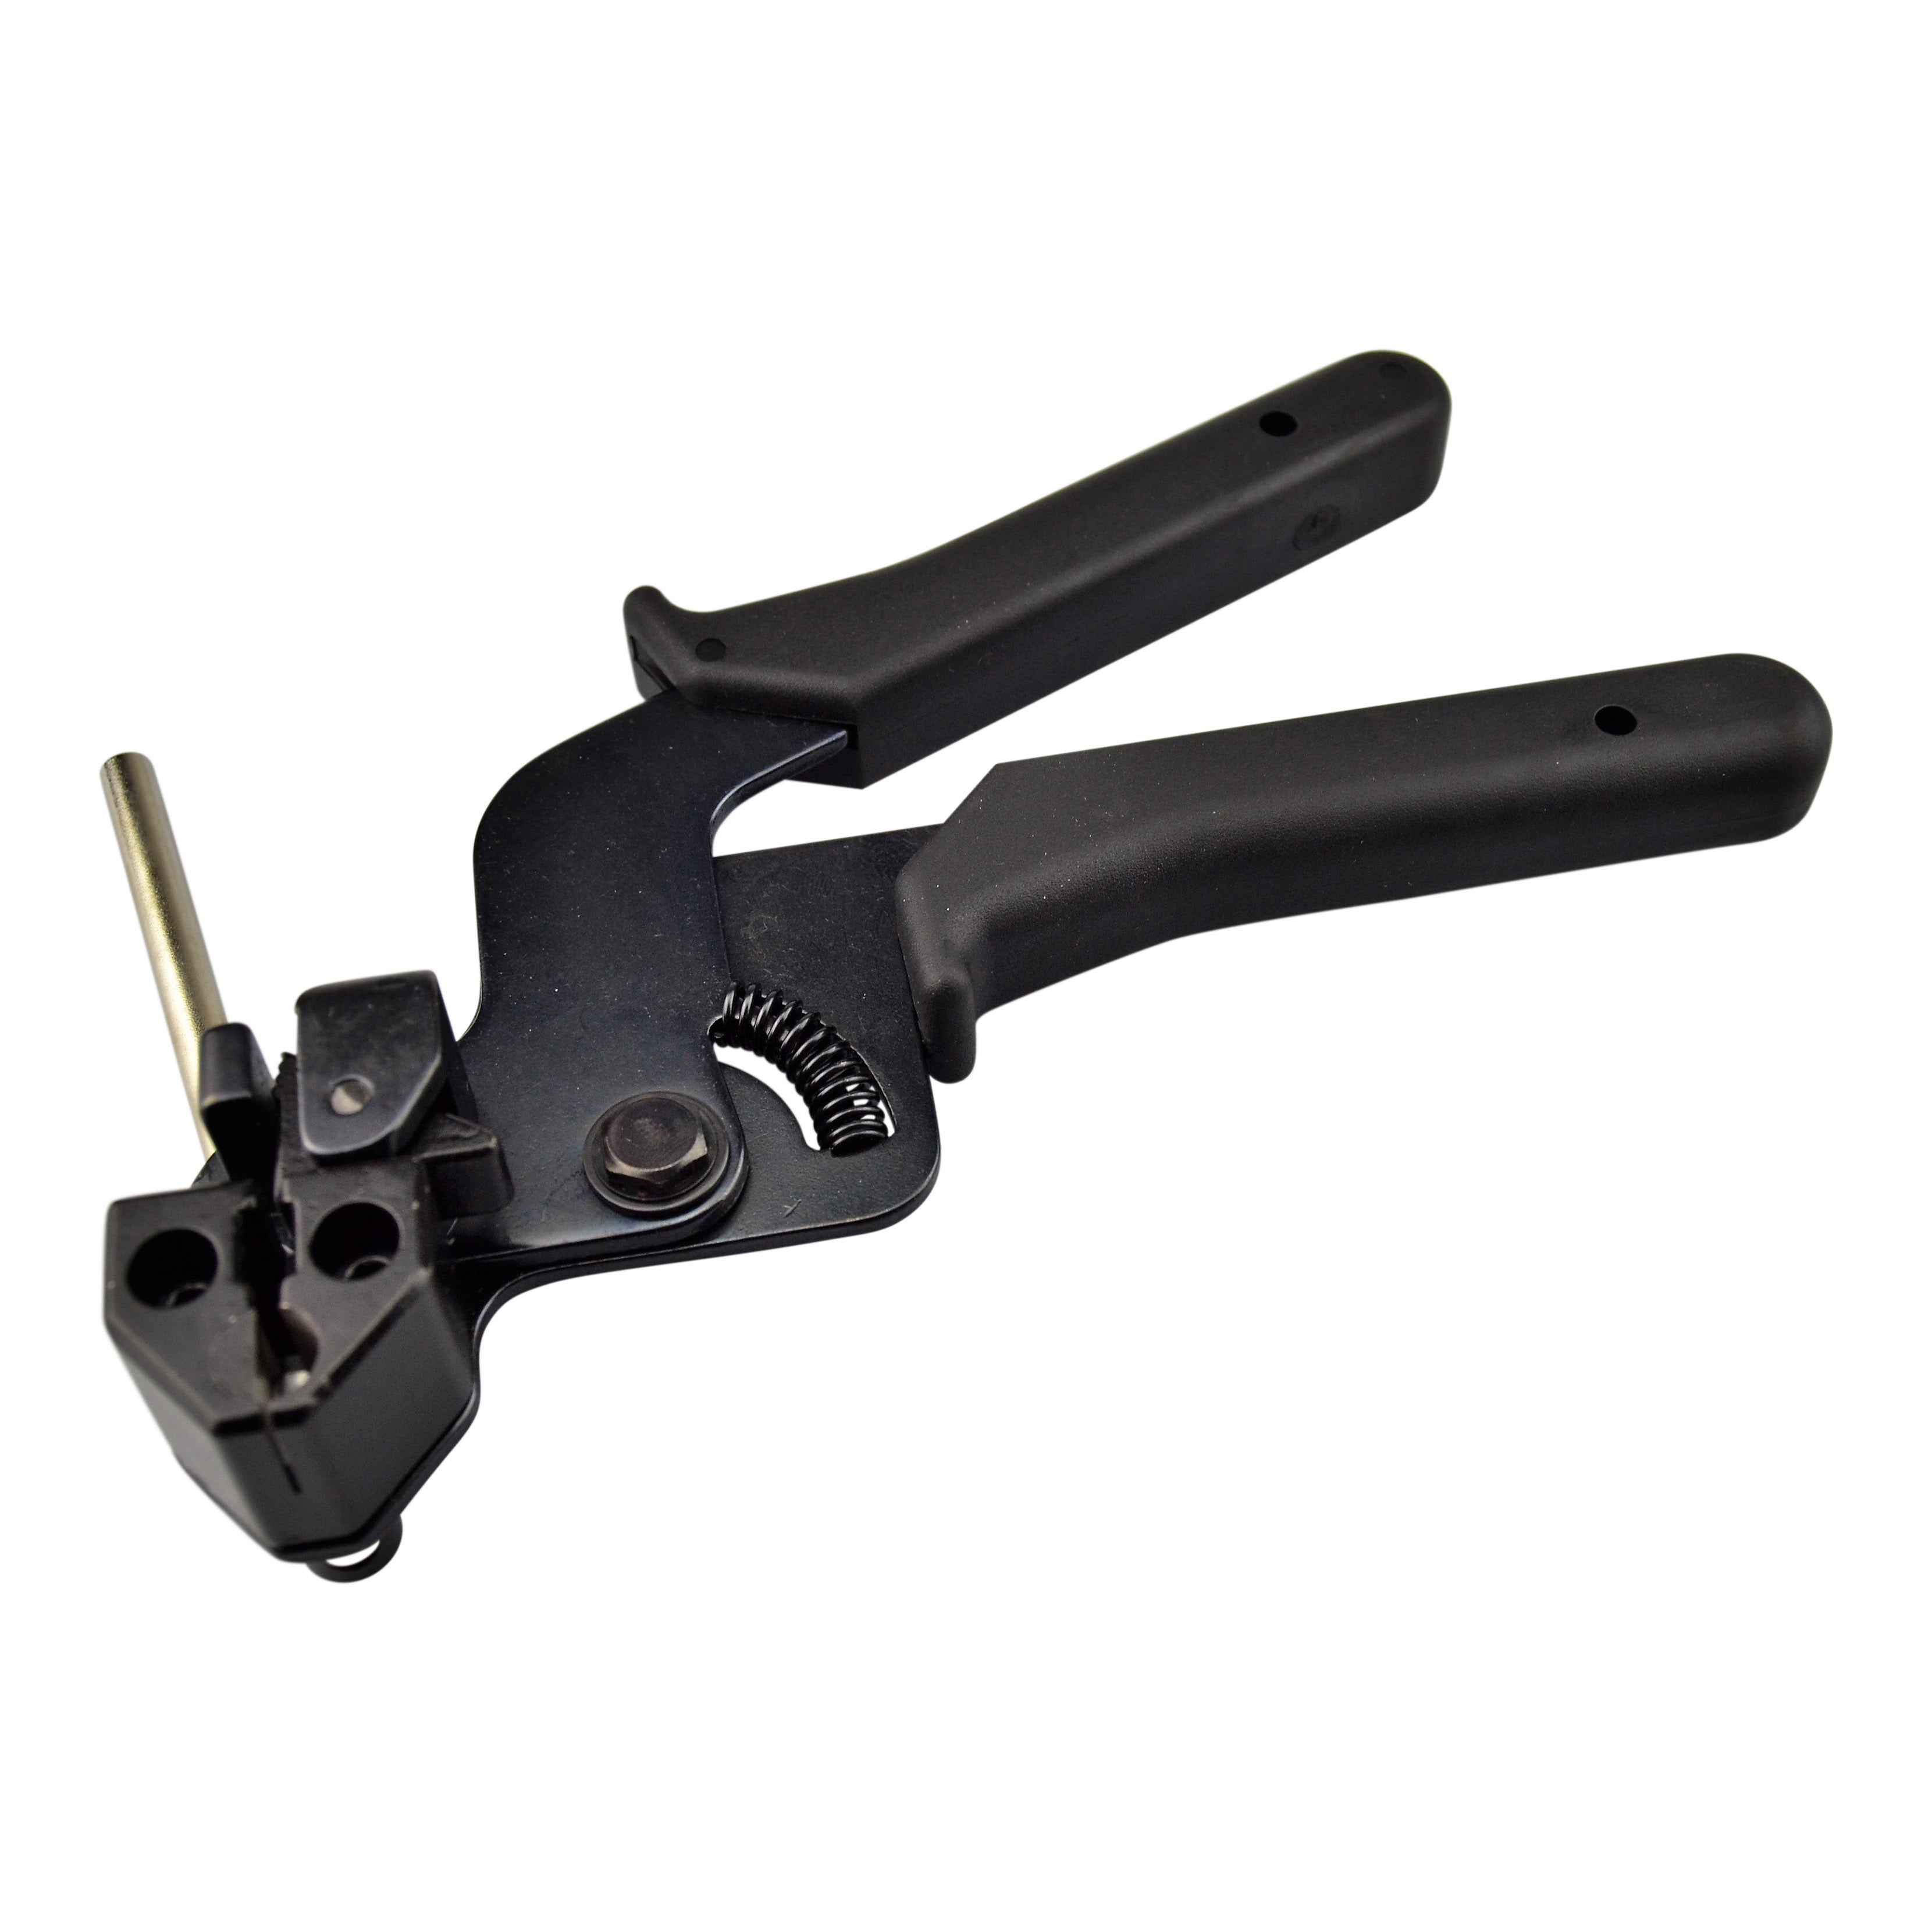 Manual Cable Tie Installation Tool to Suit Stainless Steel Cable Ties up to 12.7mm Width